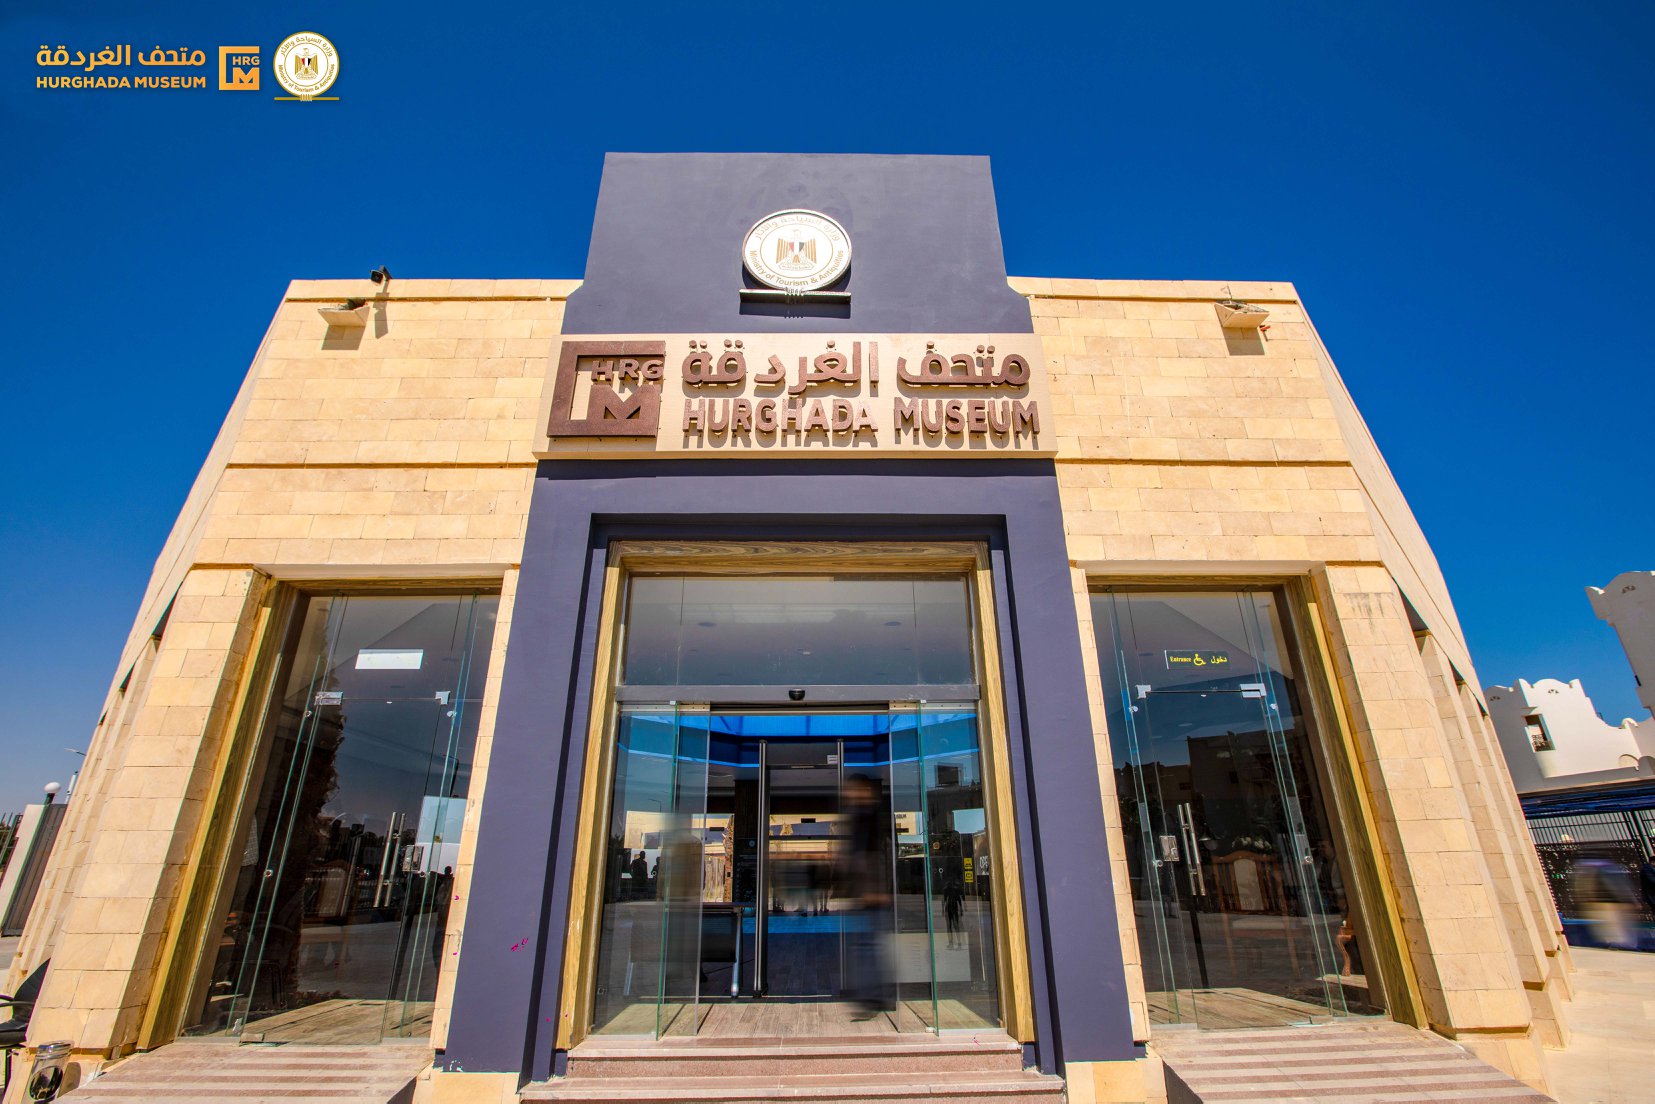 Hurghada Museum Opens to Public With Impressive Collection ...